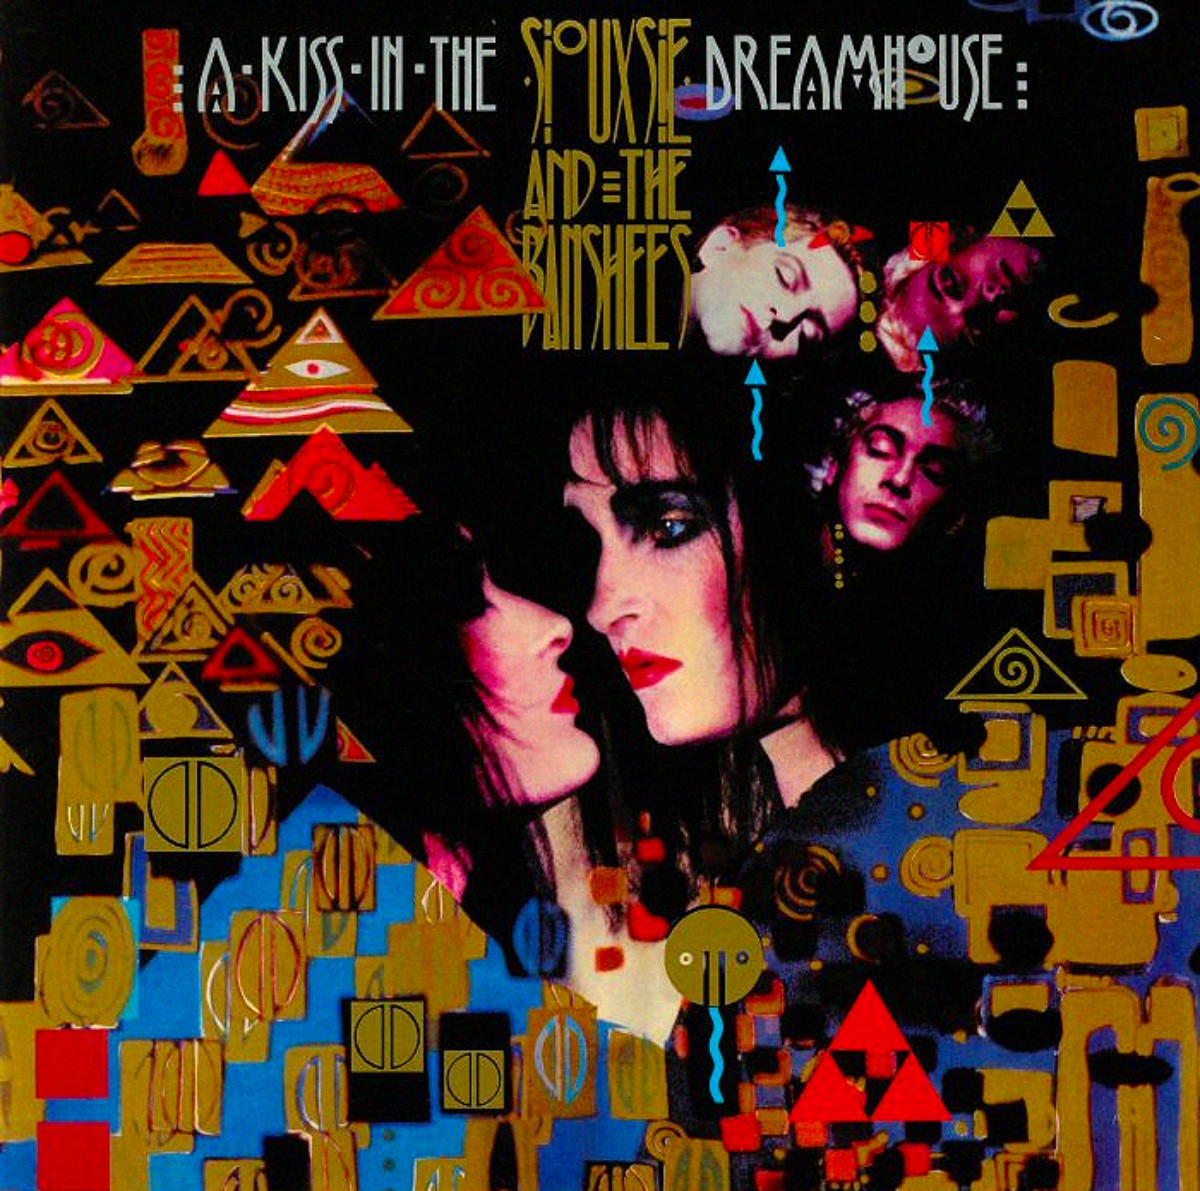 Siouxsie And The Banshees, альбом «A Kiss in the Dreamhouse» (1982)